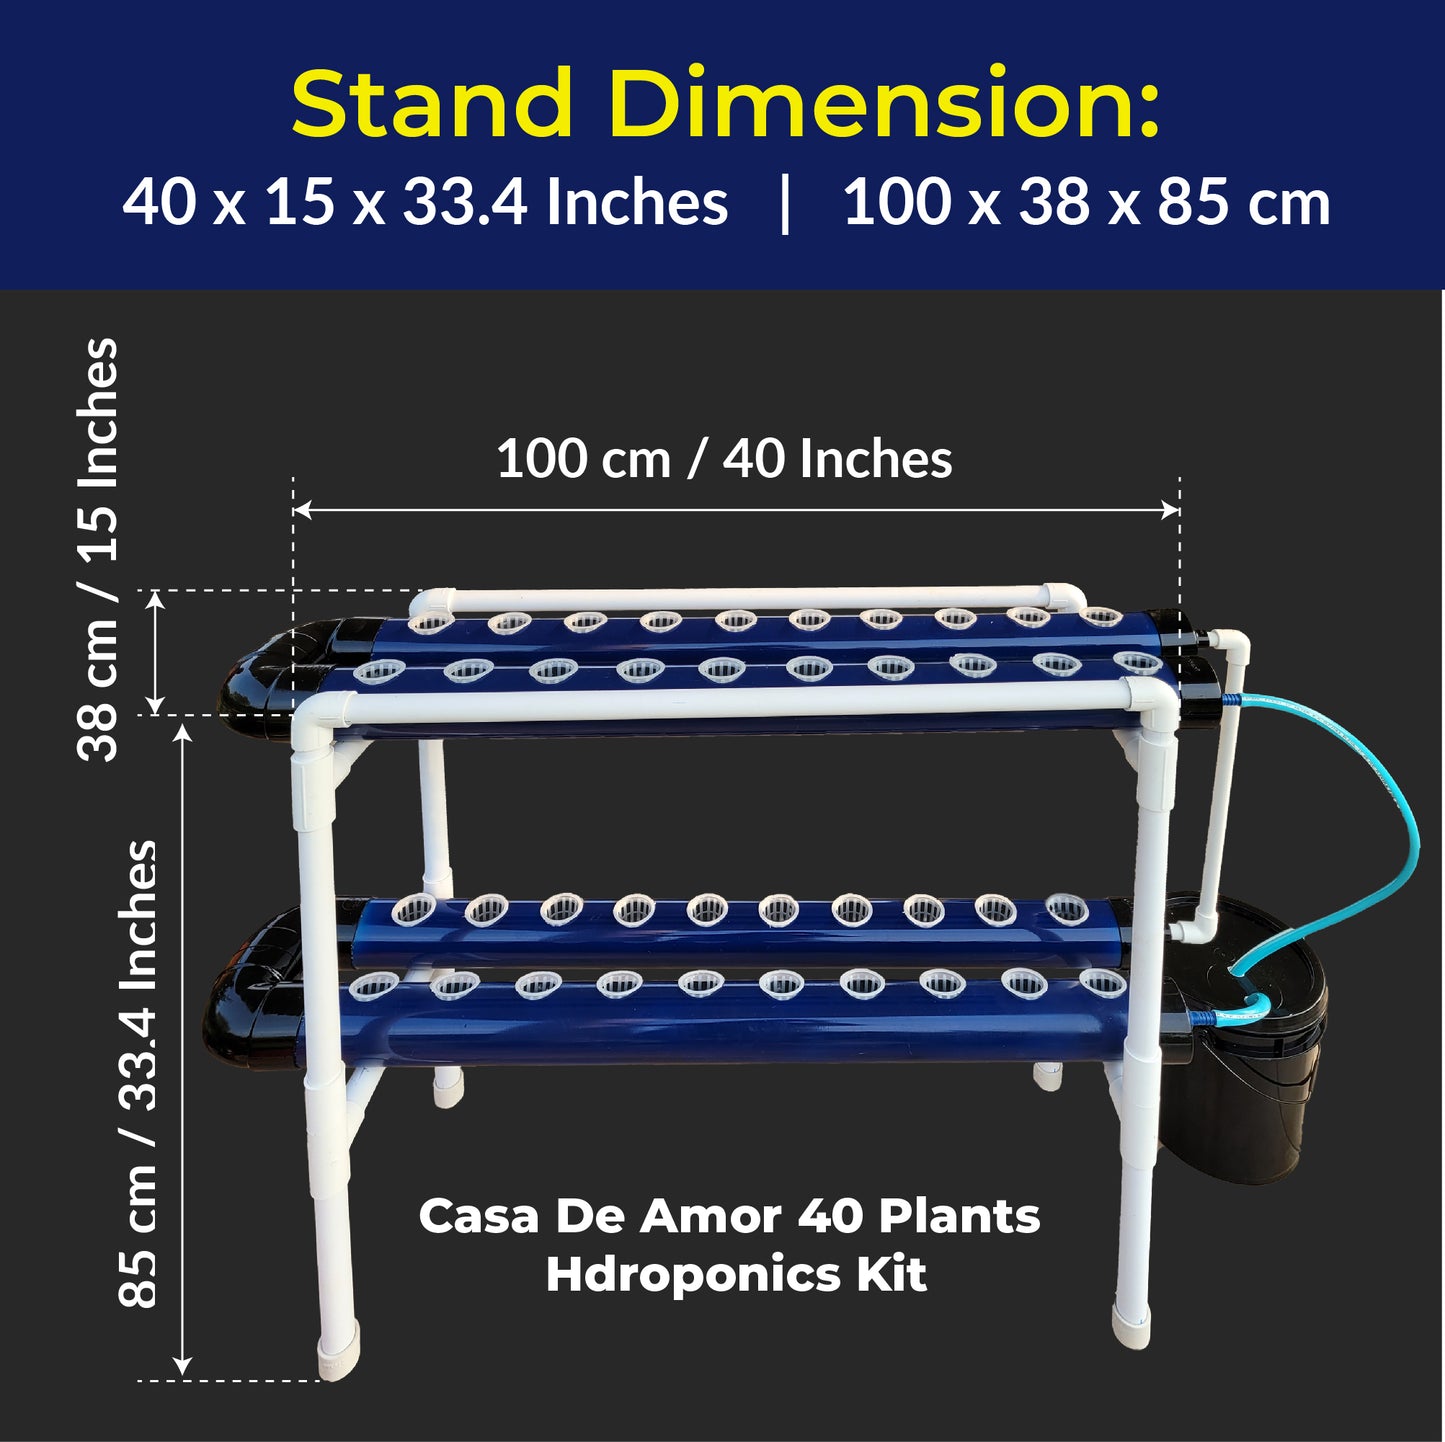 Casa De Amor Hydroponics Kit for Home- 40 Plants, Hydroponic System- Reusable for Indoor/Outdoor